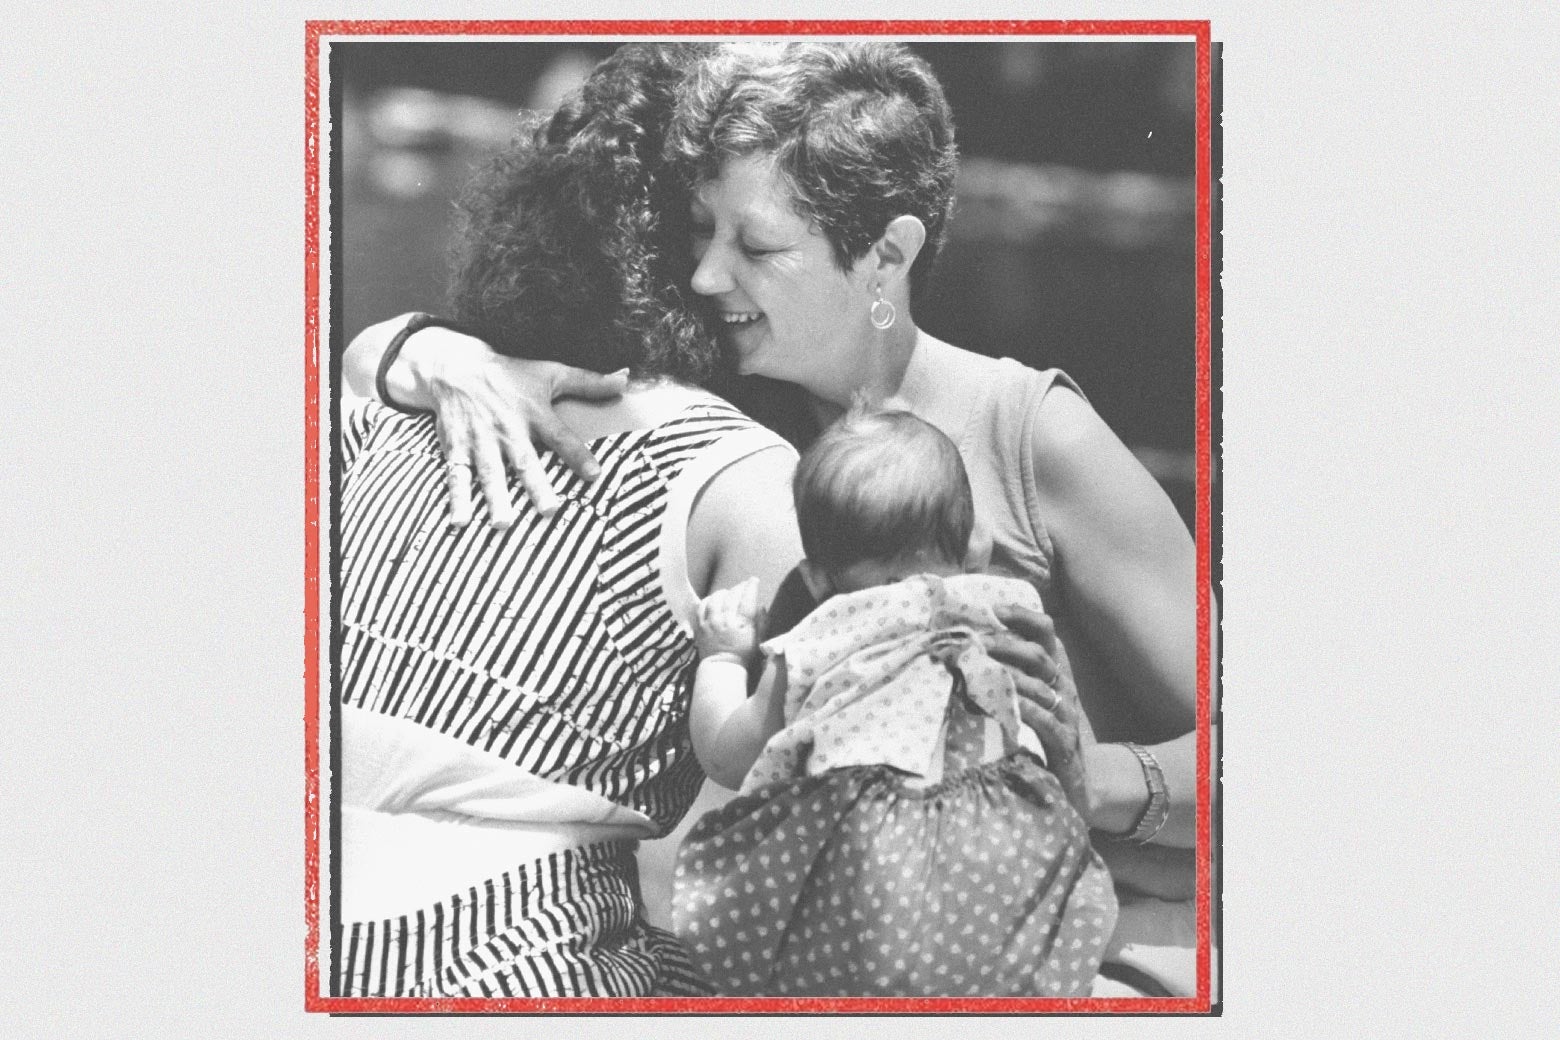 Photo of McCorvey smiling and embracing a woman and a baby in a red frame